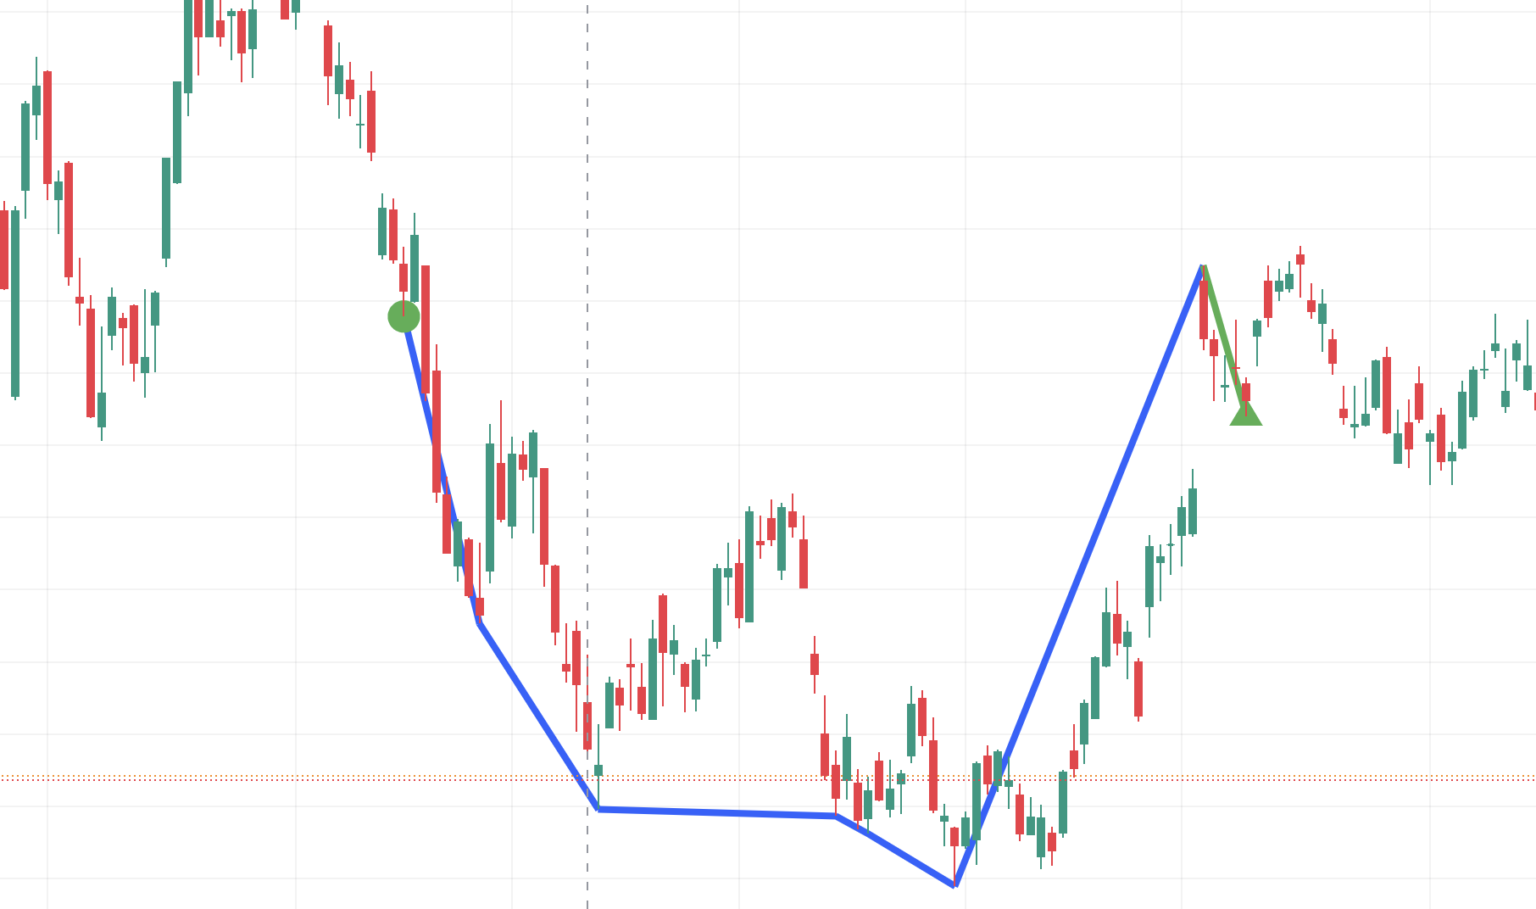 cup and handle chart